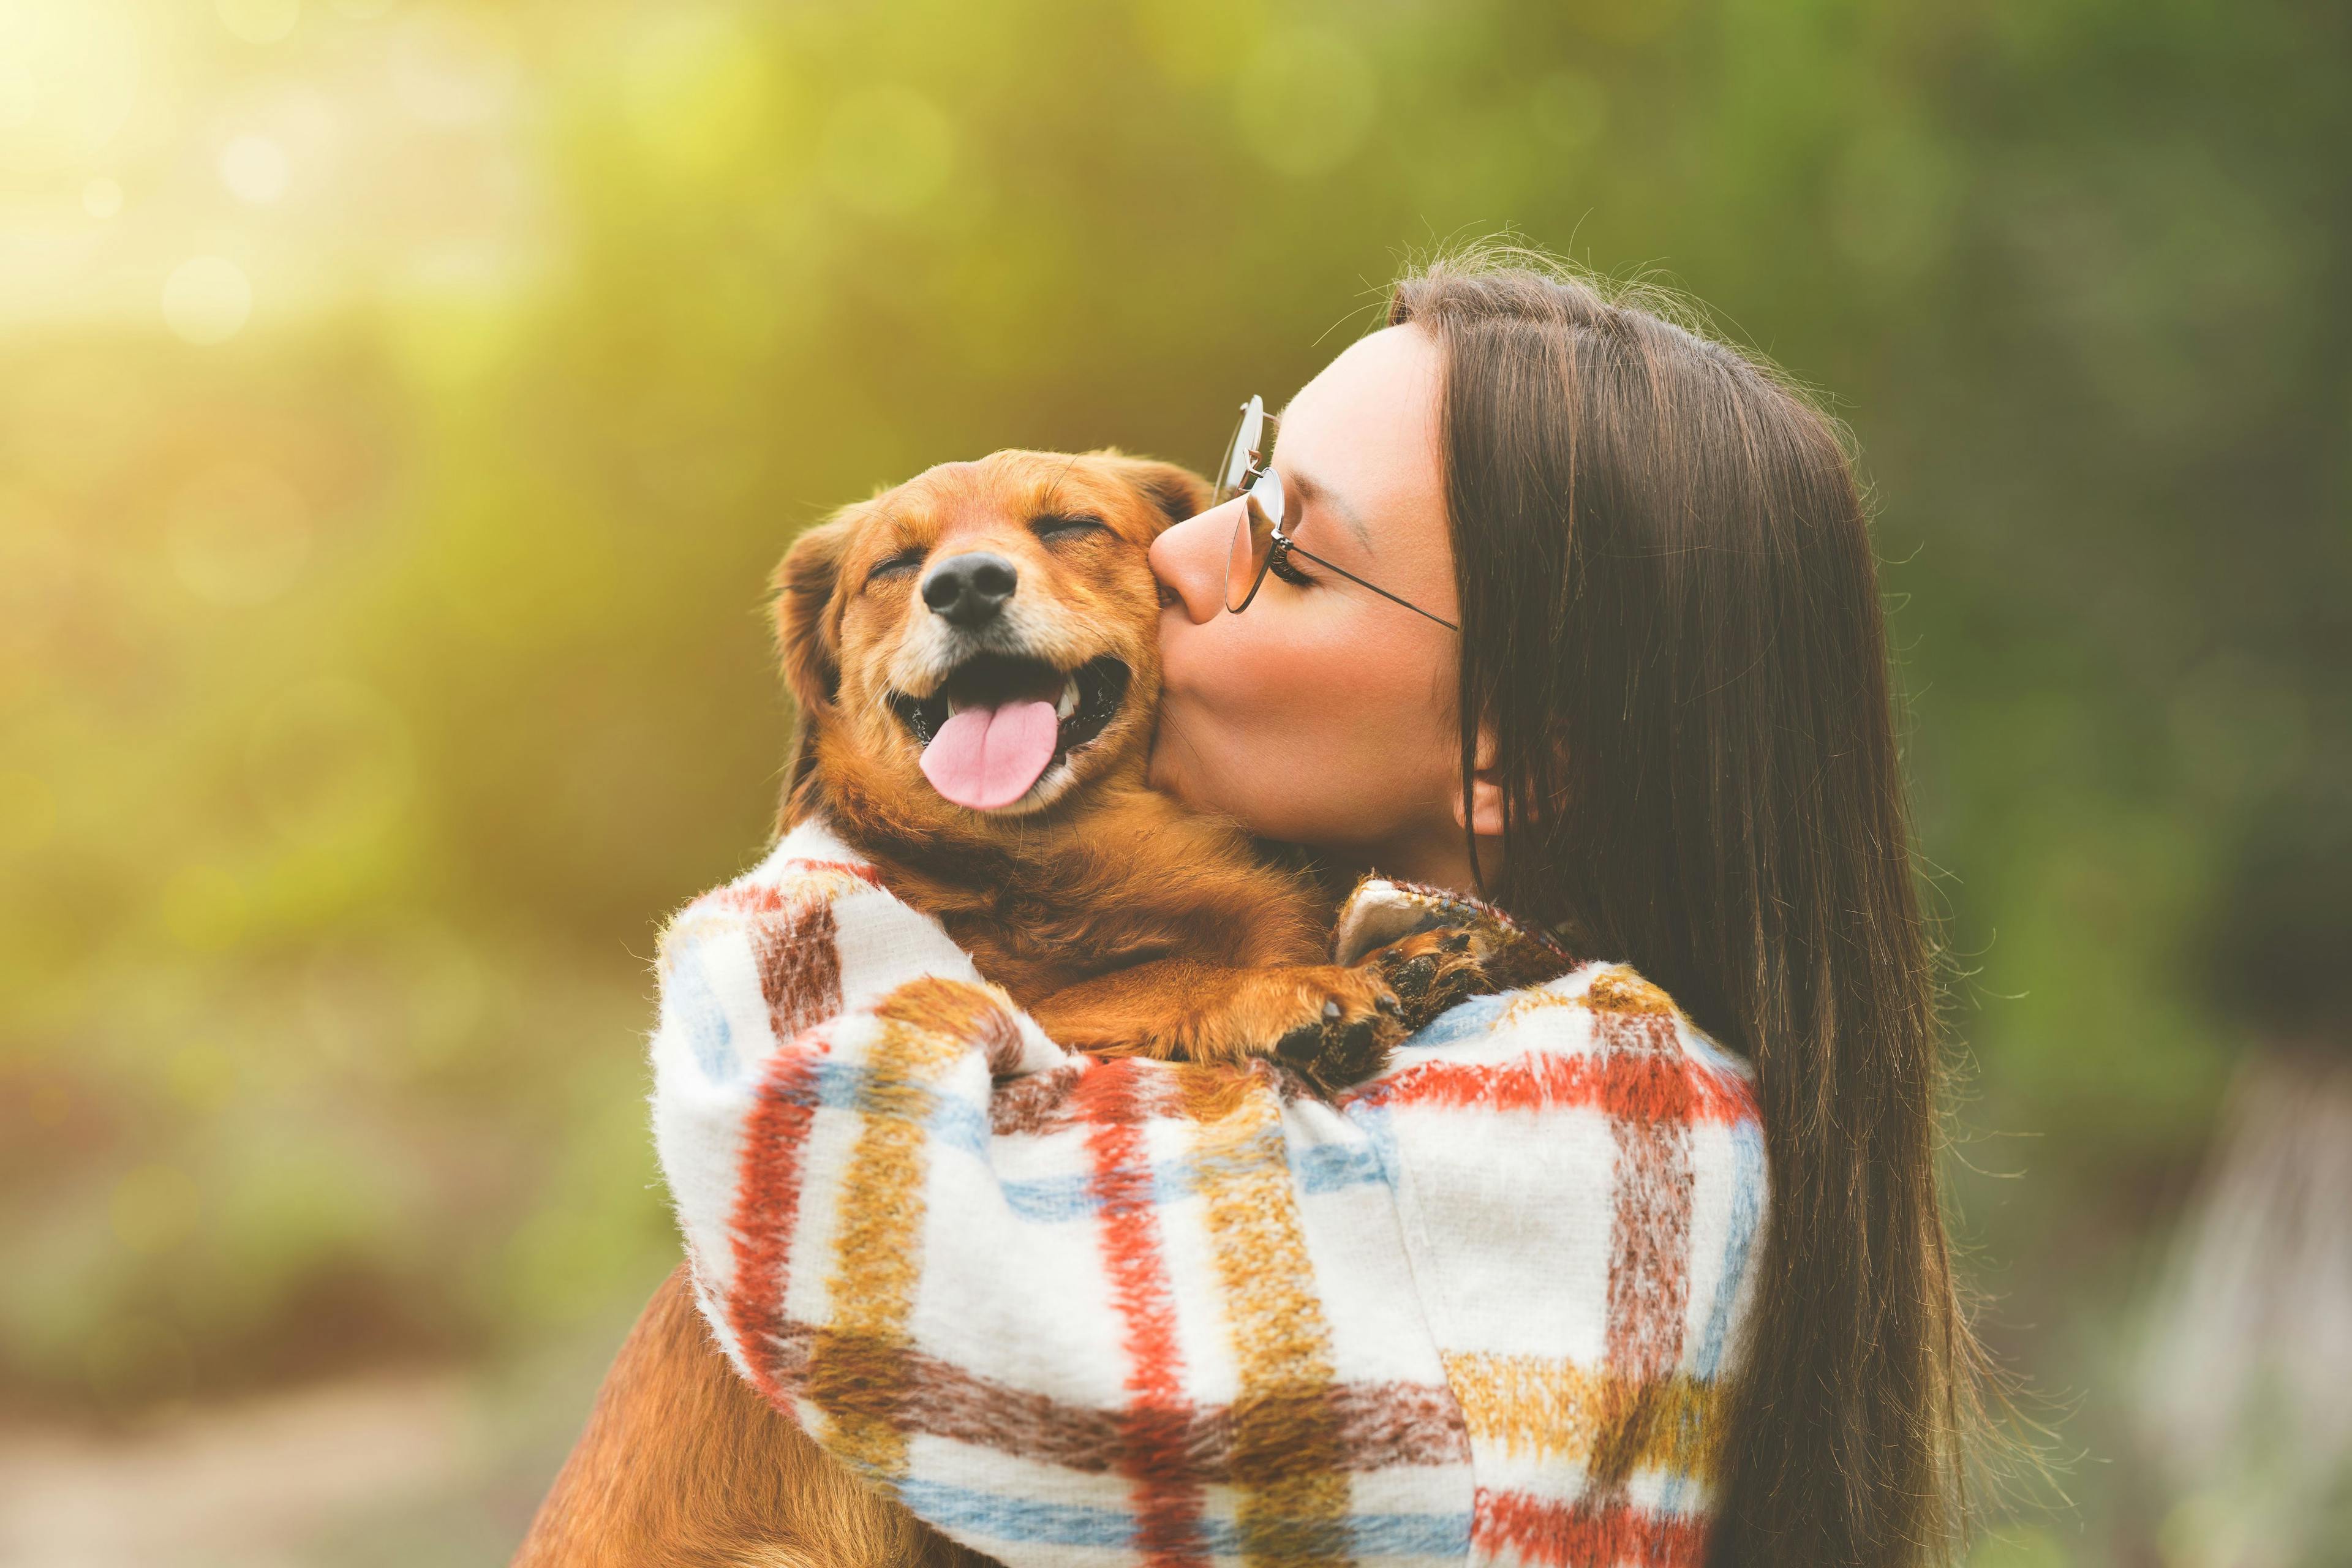 New report links pet ownership with human health care savings